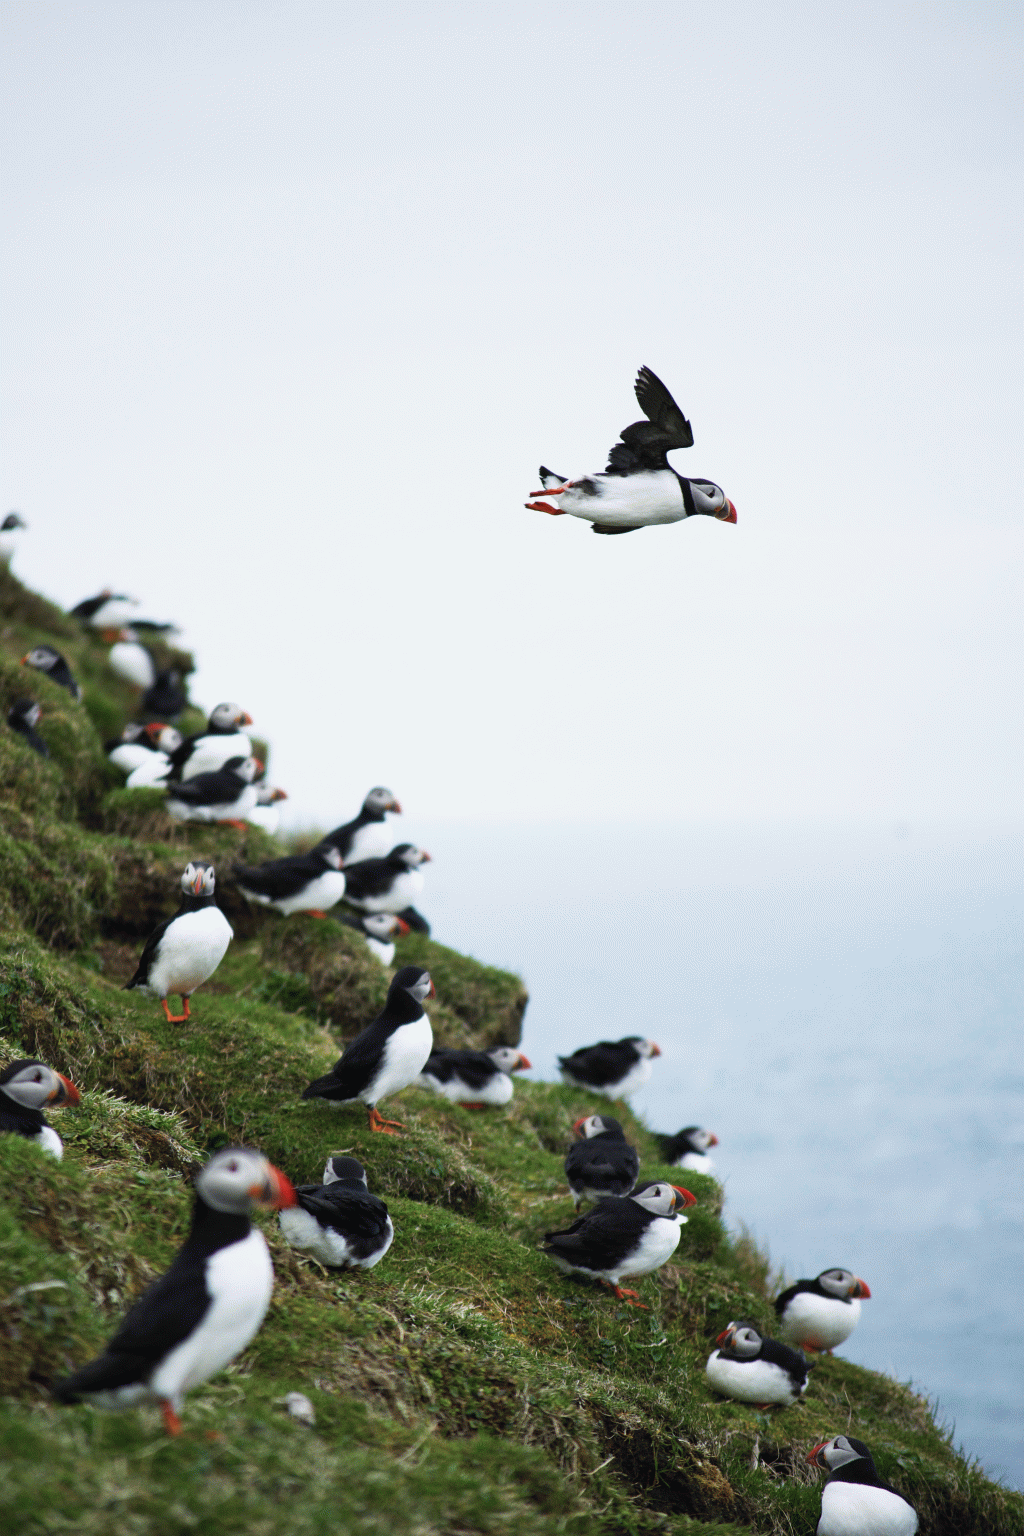 Ready for takeoff! How many of you saw a puffin this summer? | Photo by @zobolondon 